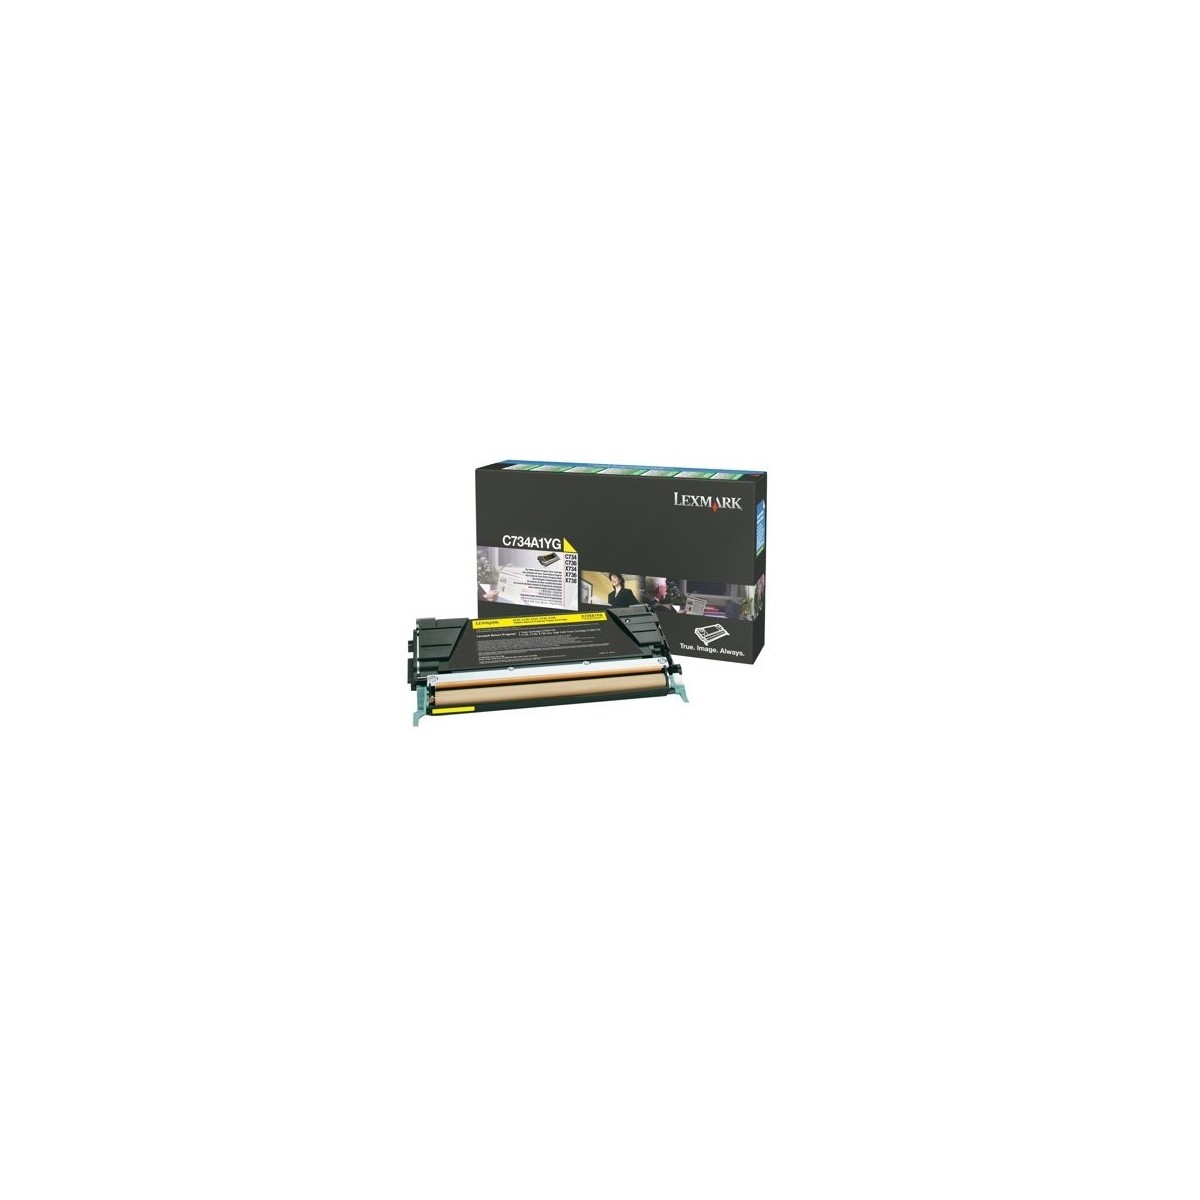 Lexmark C734A1YG - 6000 pages - Yellow - 1 pc(s)